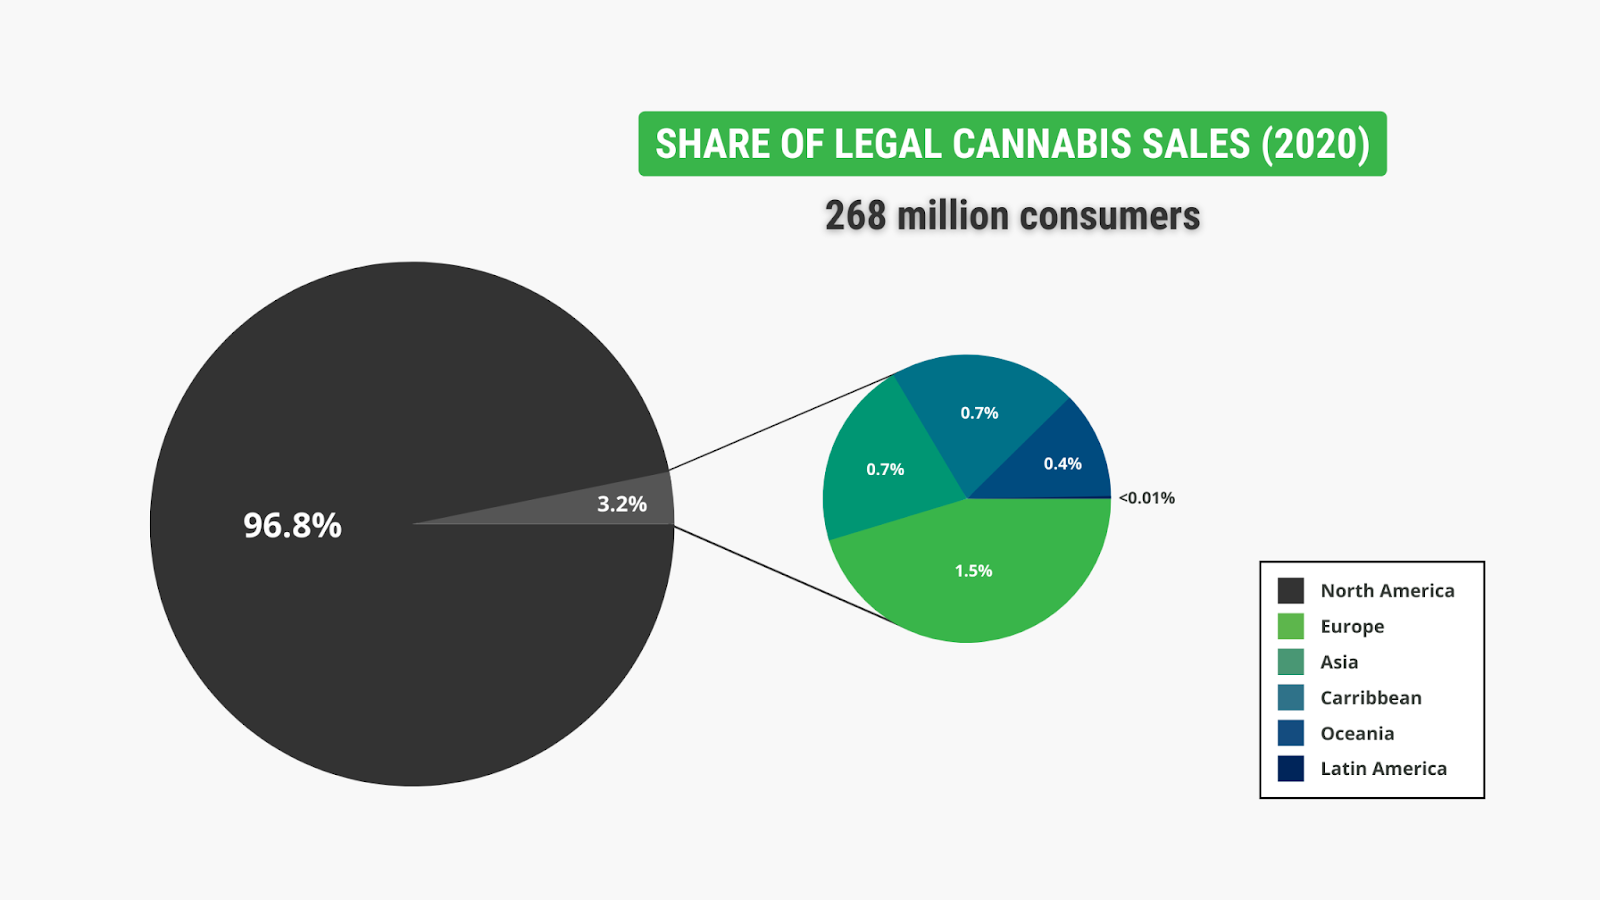 With new markets opening up and more people using cannabis, it's important to stay up-to-date on the latest market trends and cannabis industry statistics.